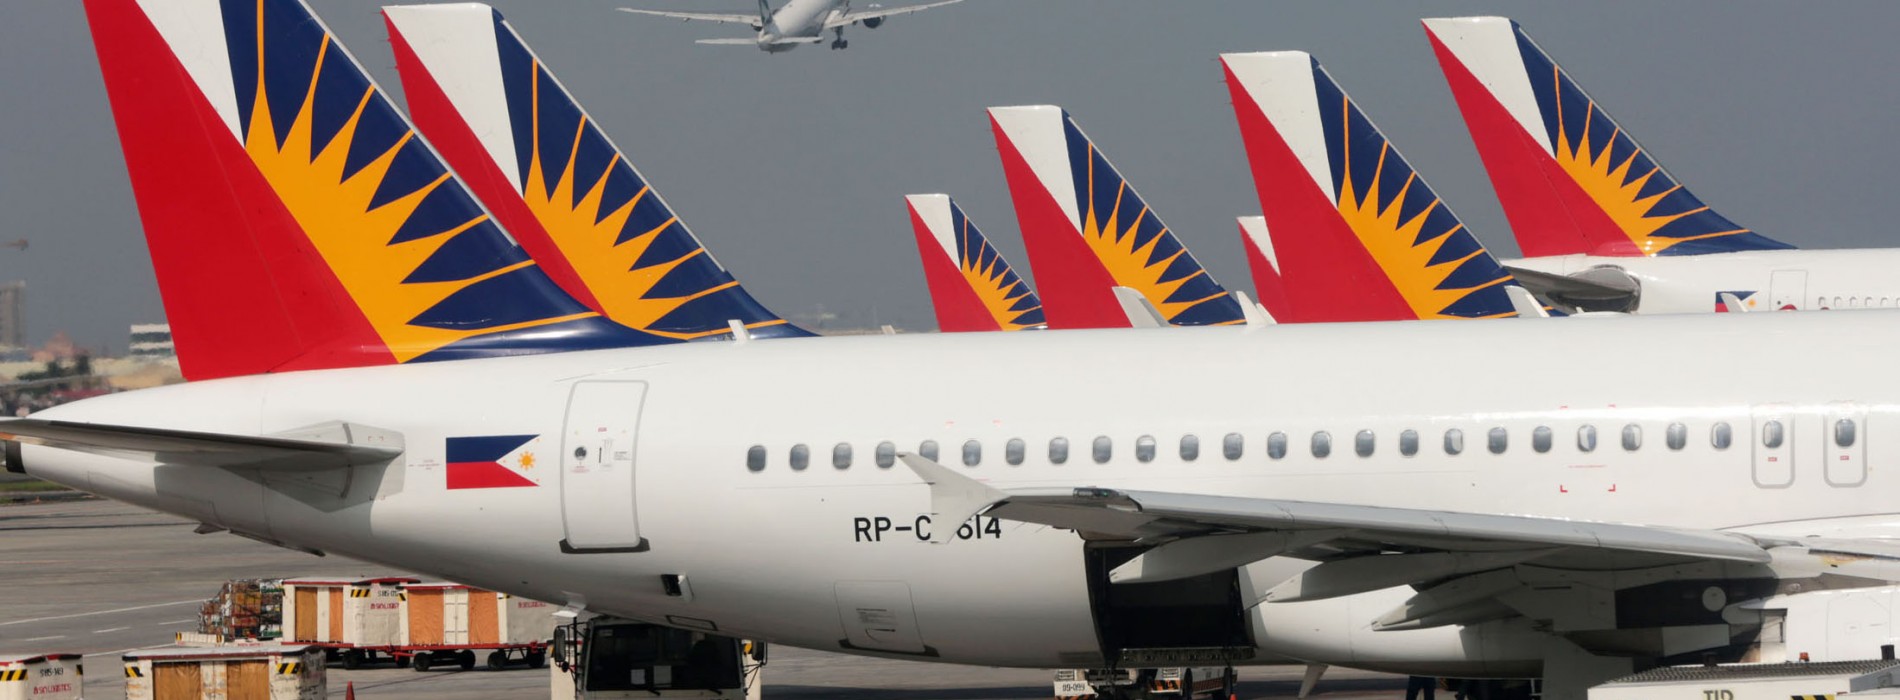 Philippines Airlines to start direct flights between India and Philippines soon